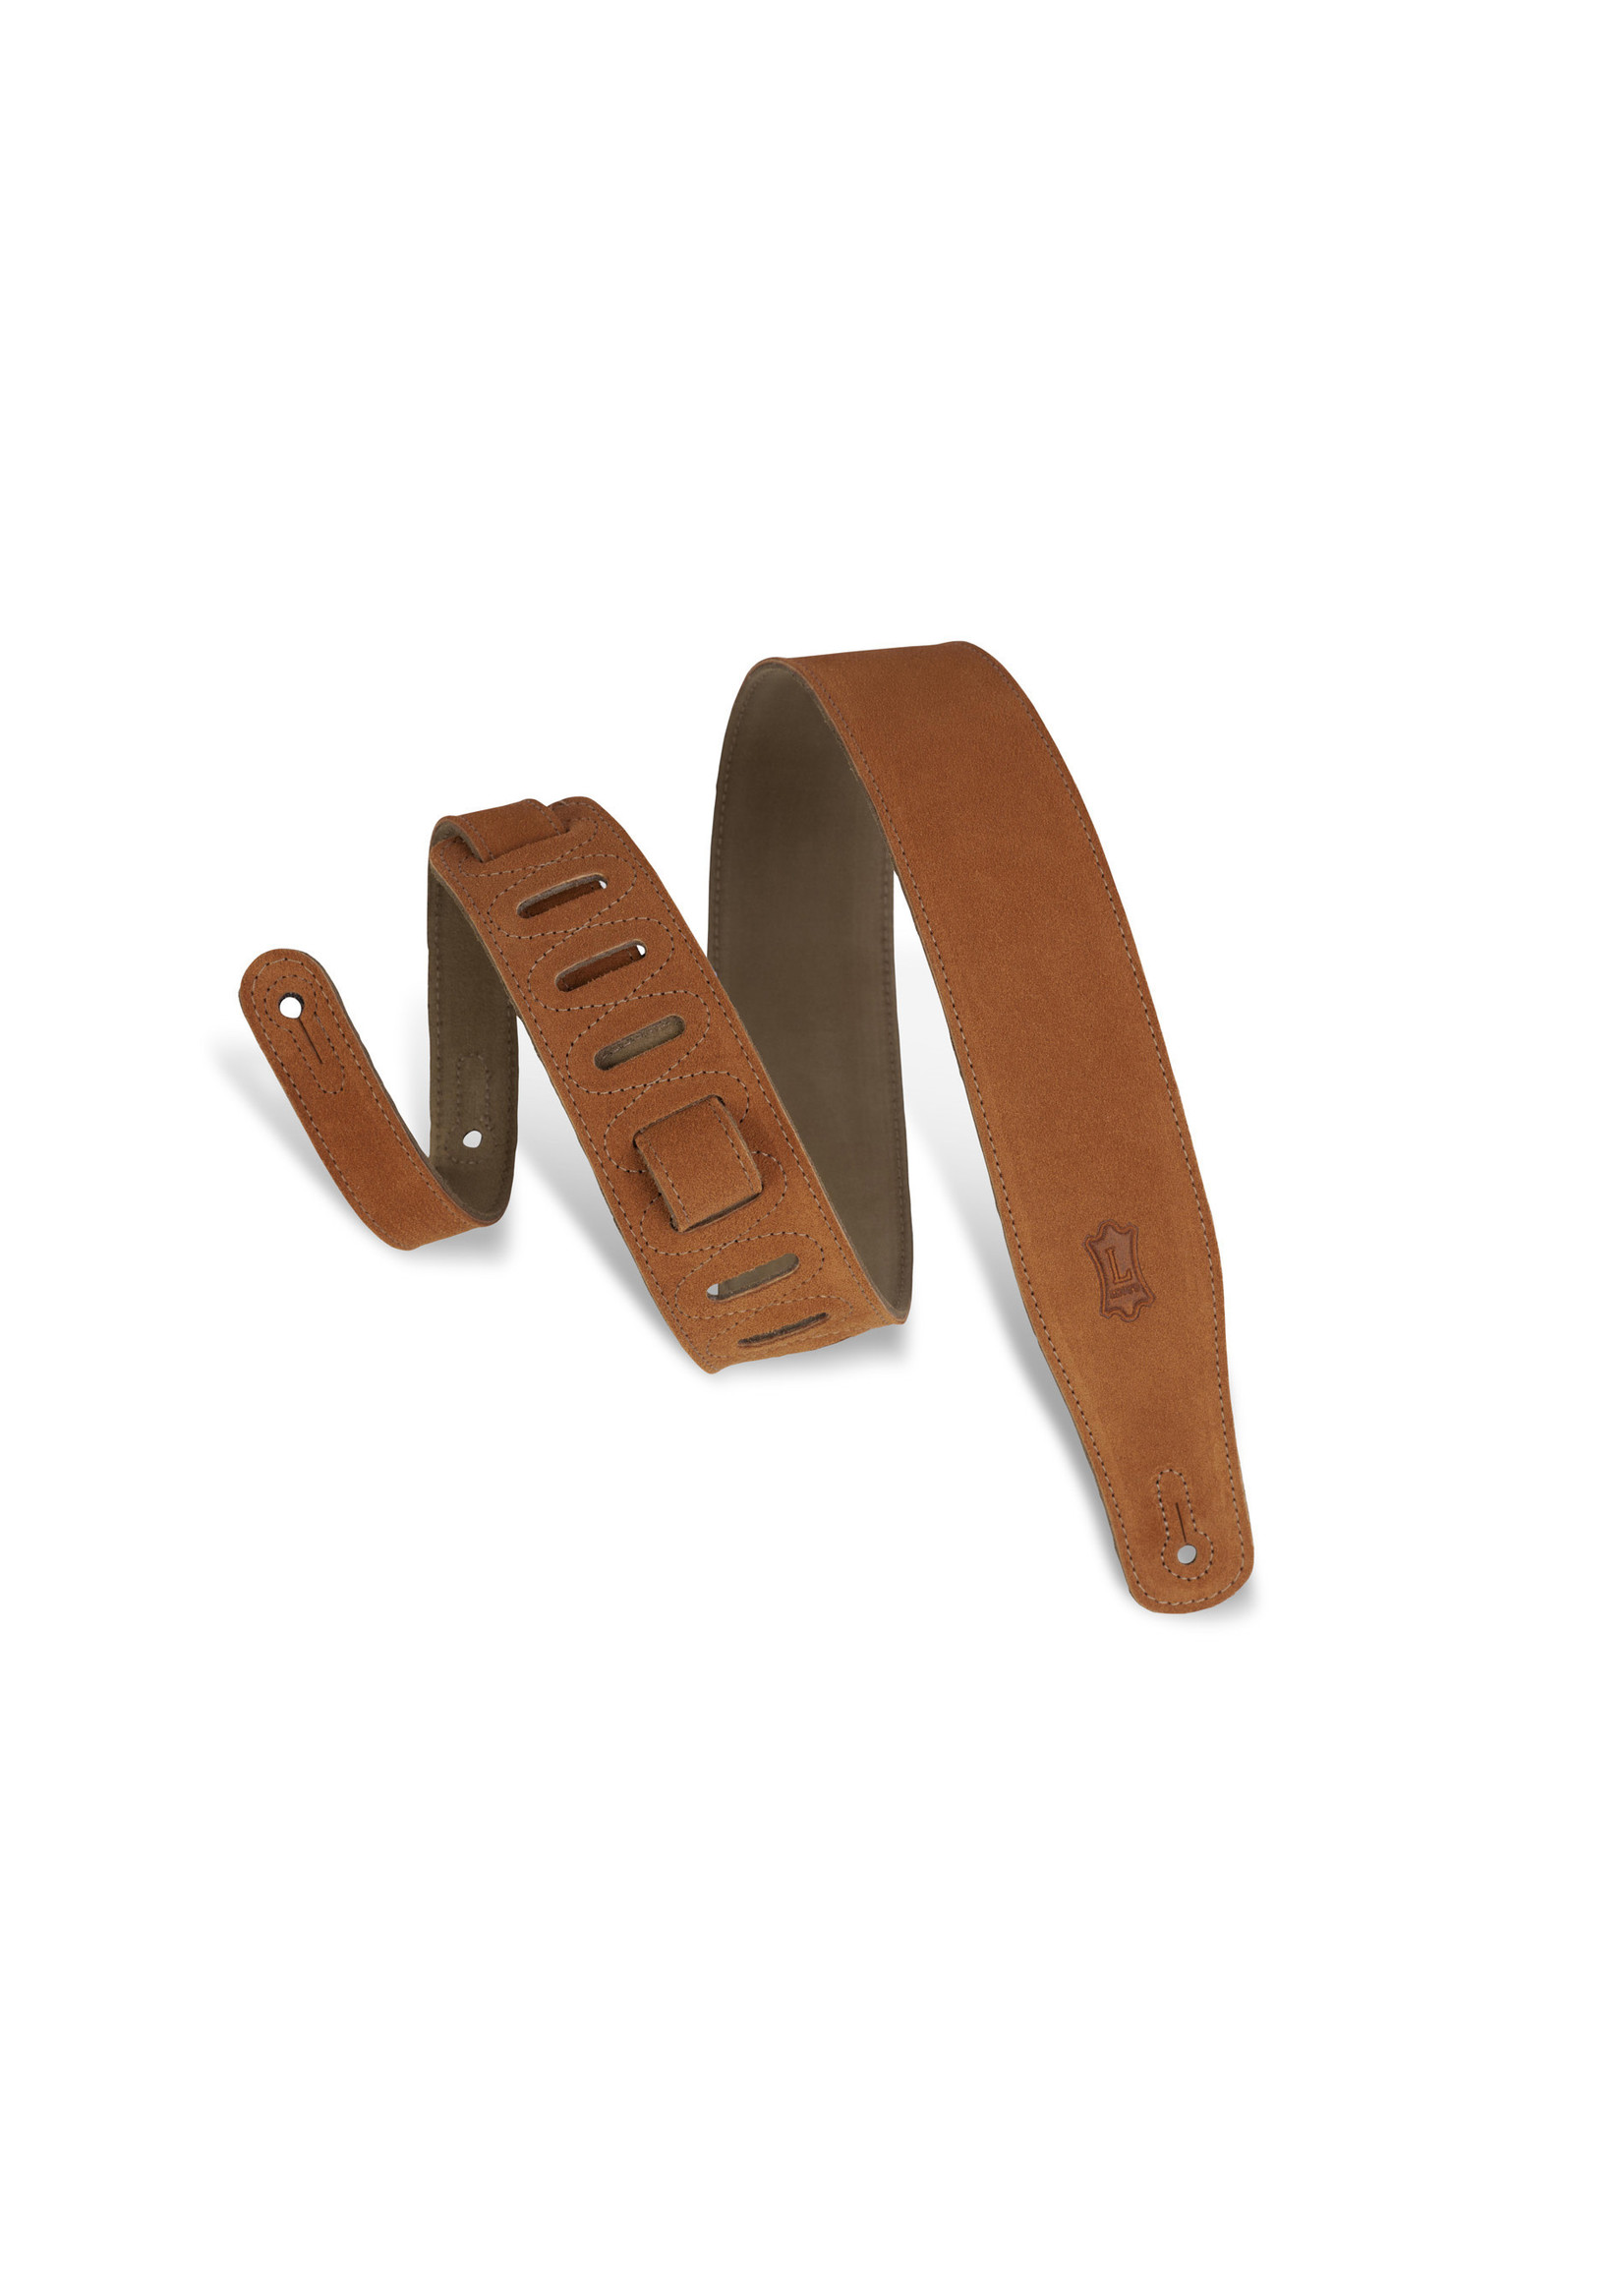 Levy's Levy's Guitar Strap 2.5" Classic Series Suede